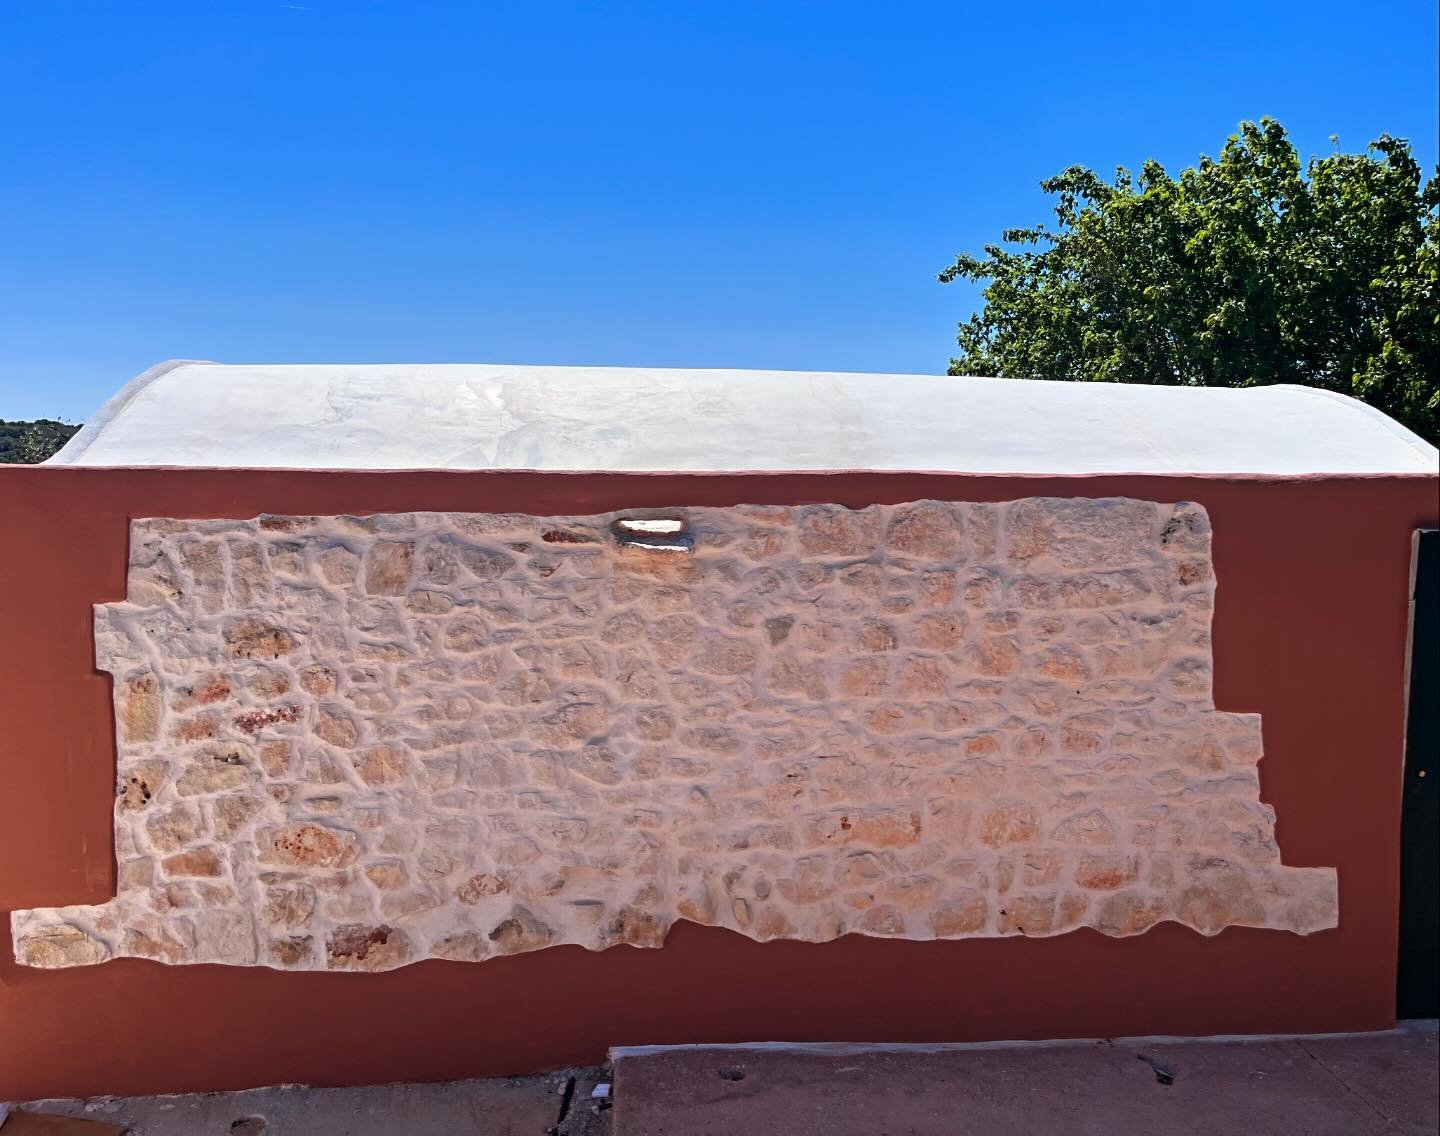 ONE SIDE of a #lamia bordered and plastered. This was my old studio and now a guest house on the property.

#puglia #puglialife #lamiavita #ristrutturazione #landscape #southernitaly